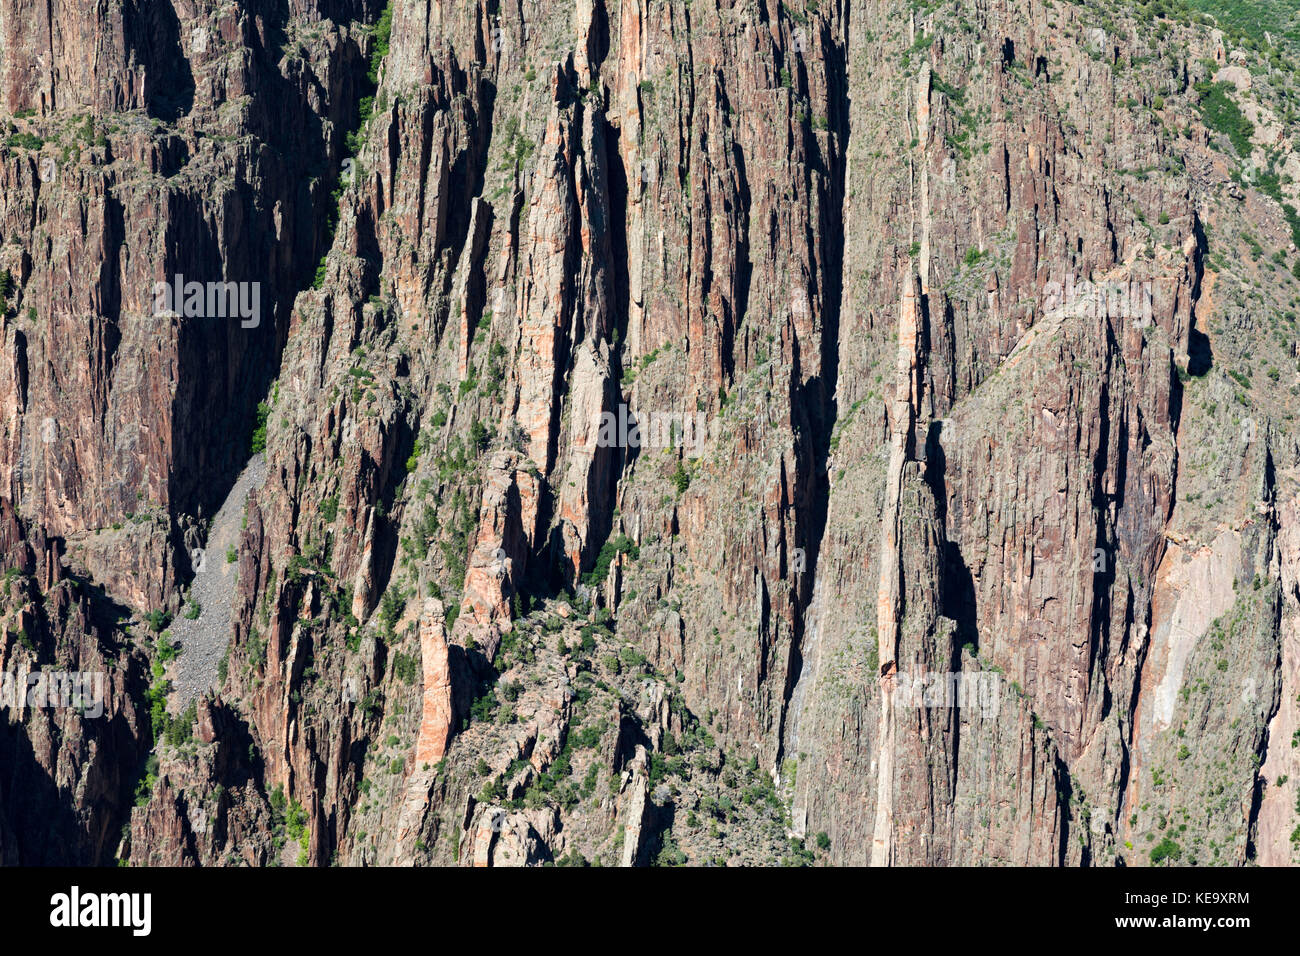 Close up of canyon wall showing exposed precambrian gneiss, schist and pegmatite dikes, Black Canyon of the Gunnison National Park, Colorado, USA Stock Photo